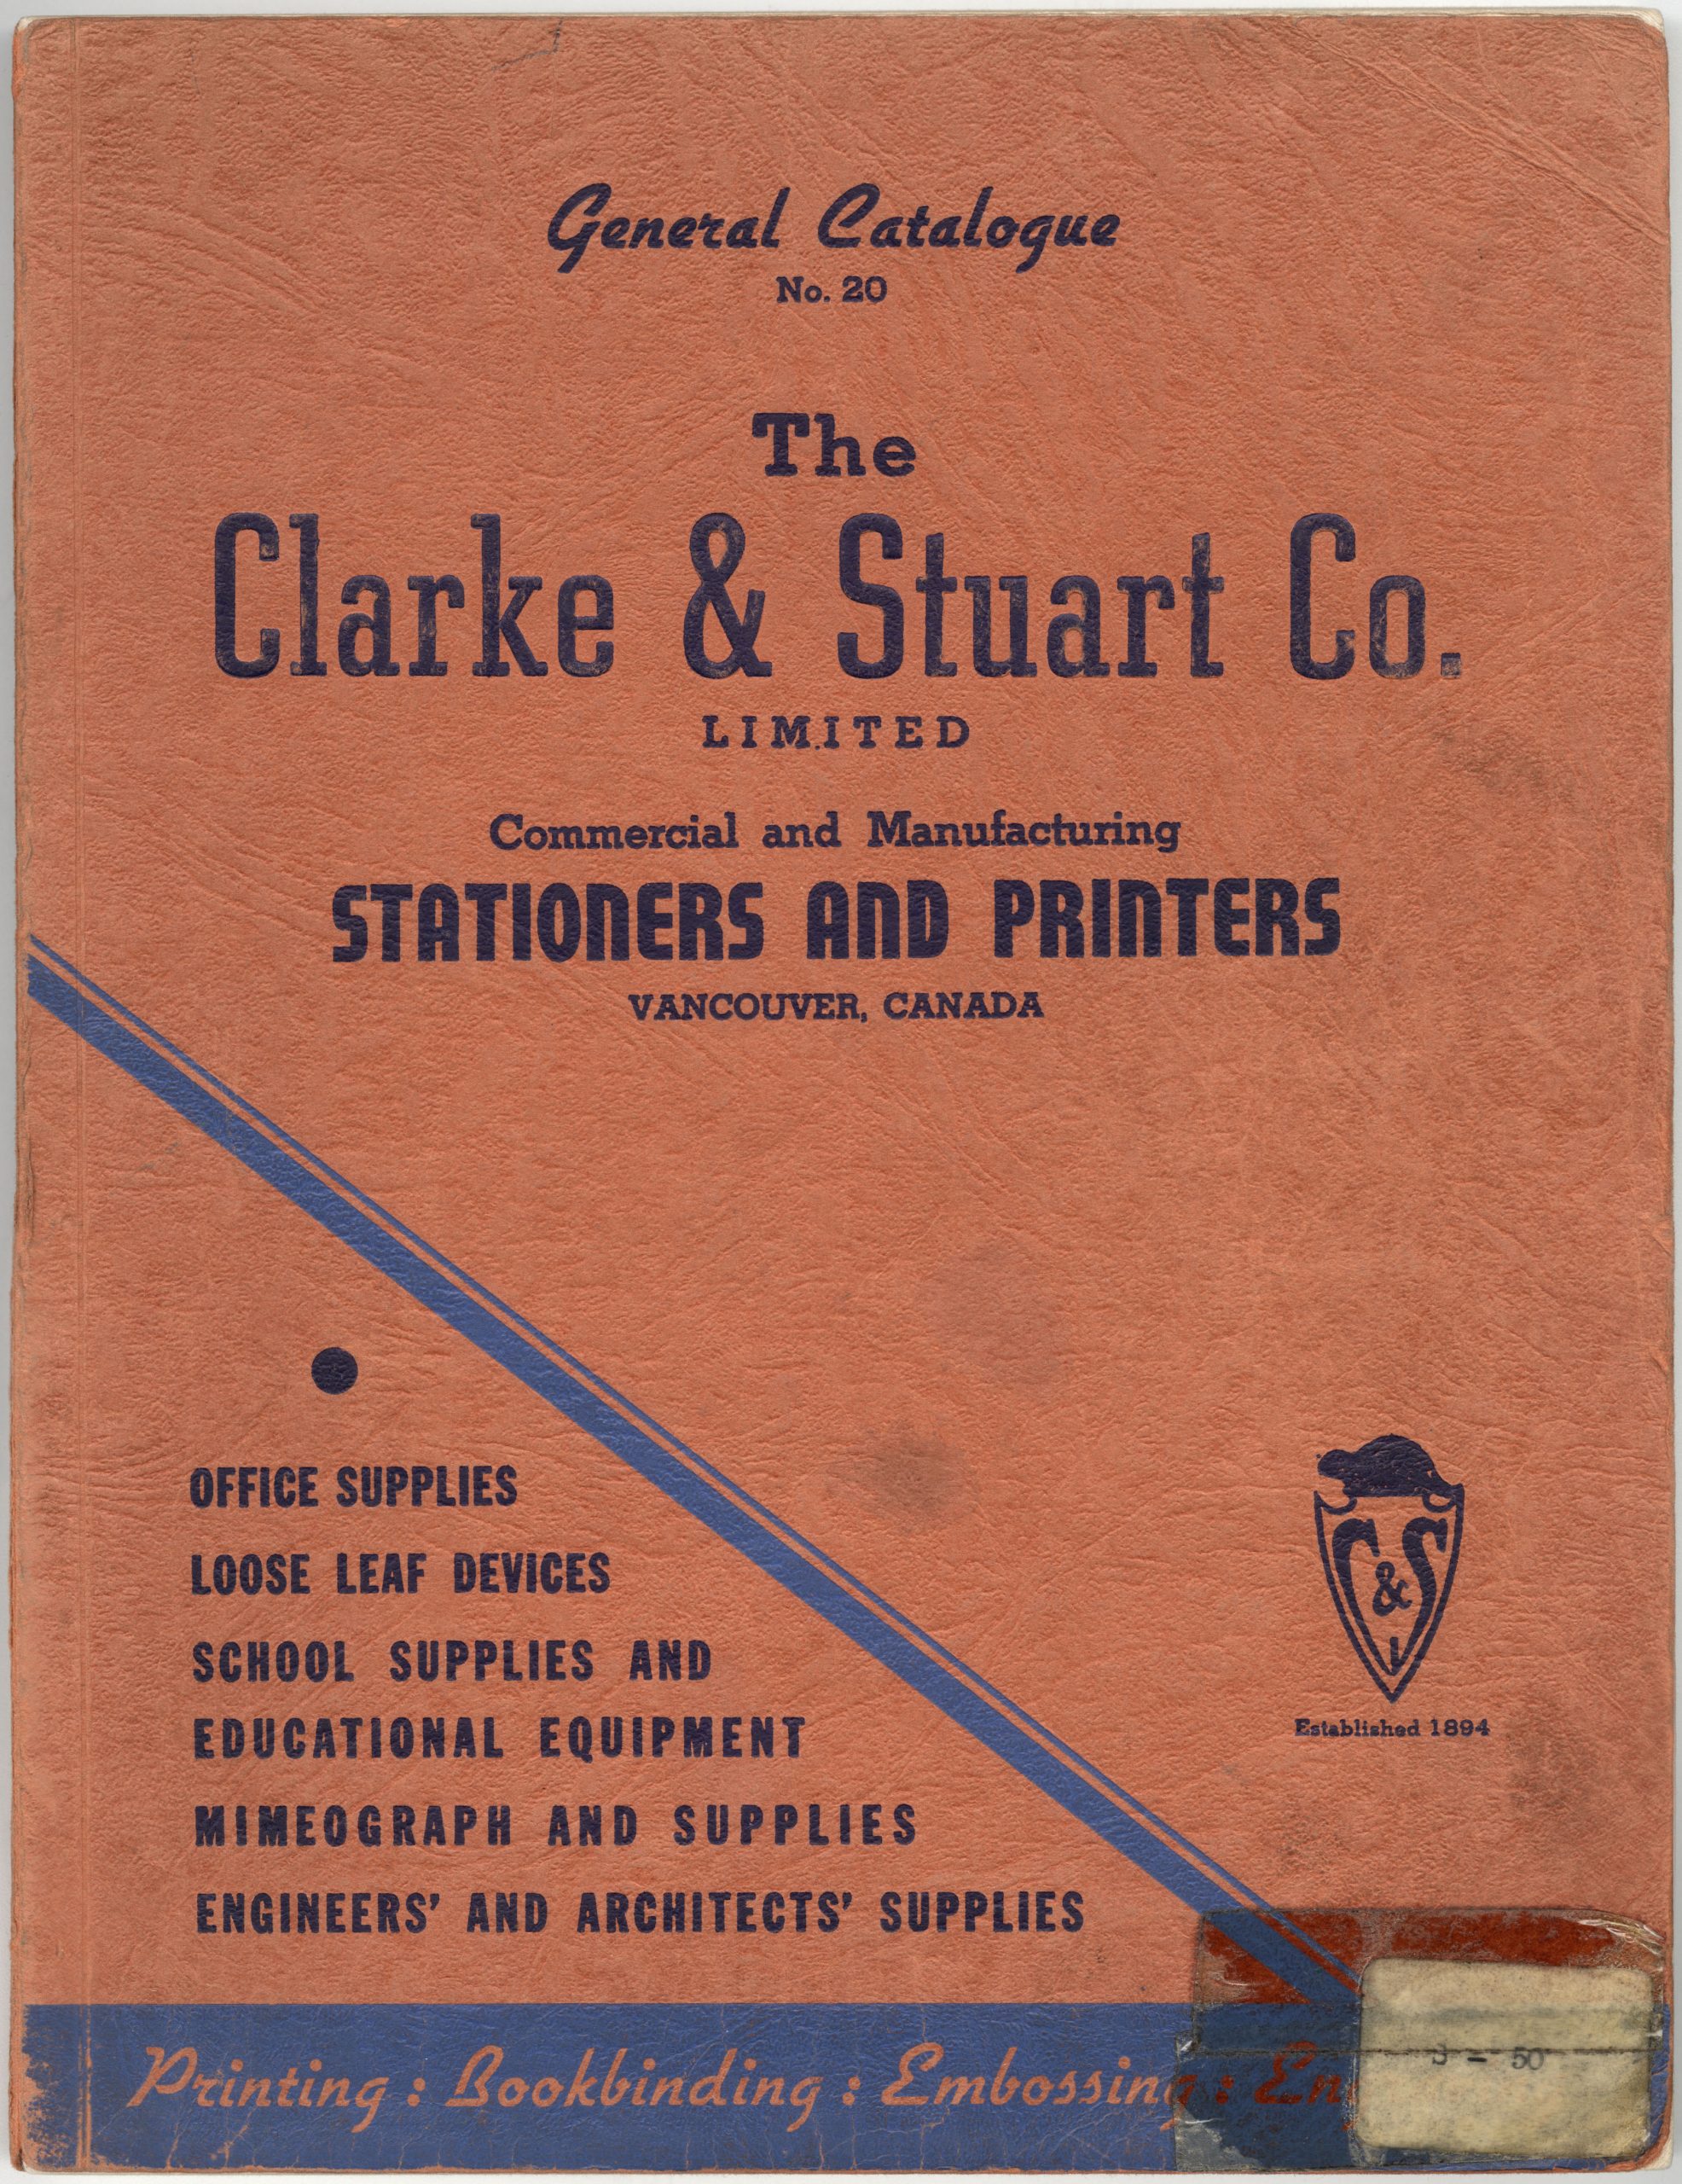 Book Covers - Canadian Learning Supply Inc.